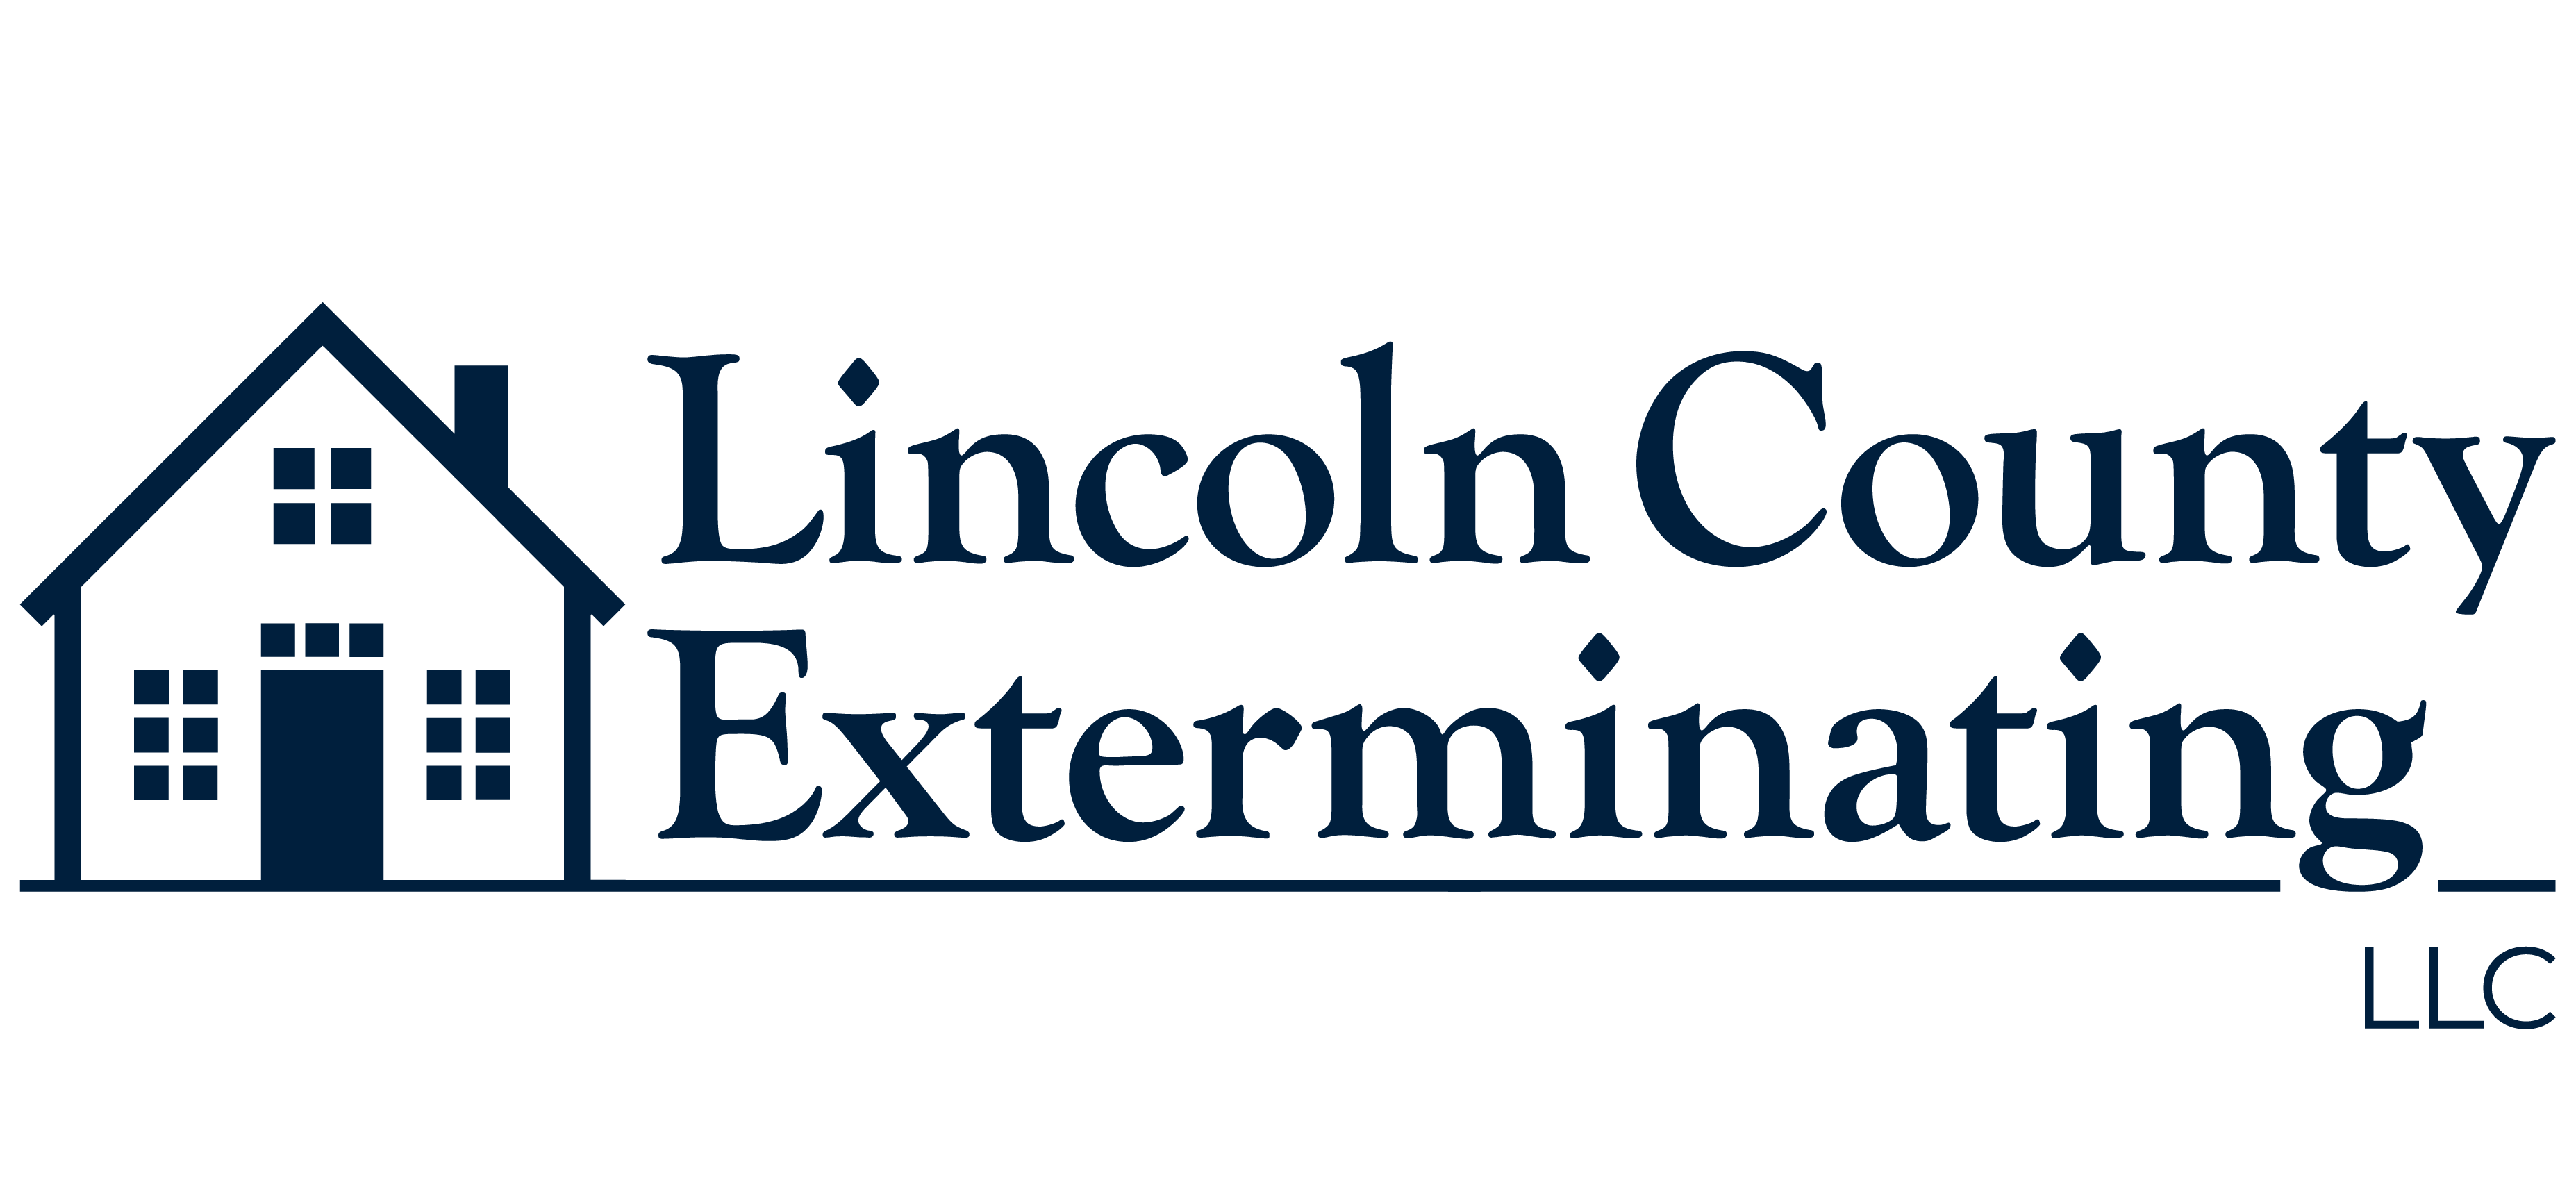 Lincoln County Exterminating, LLC